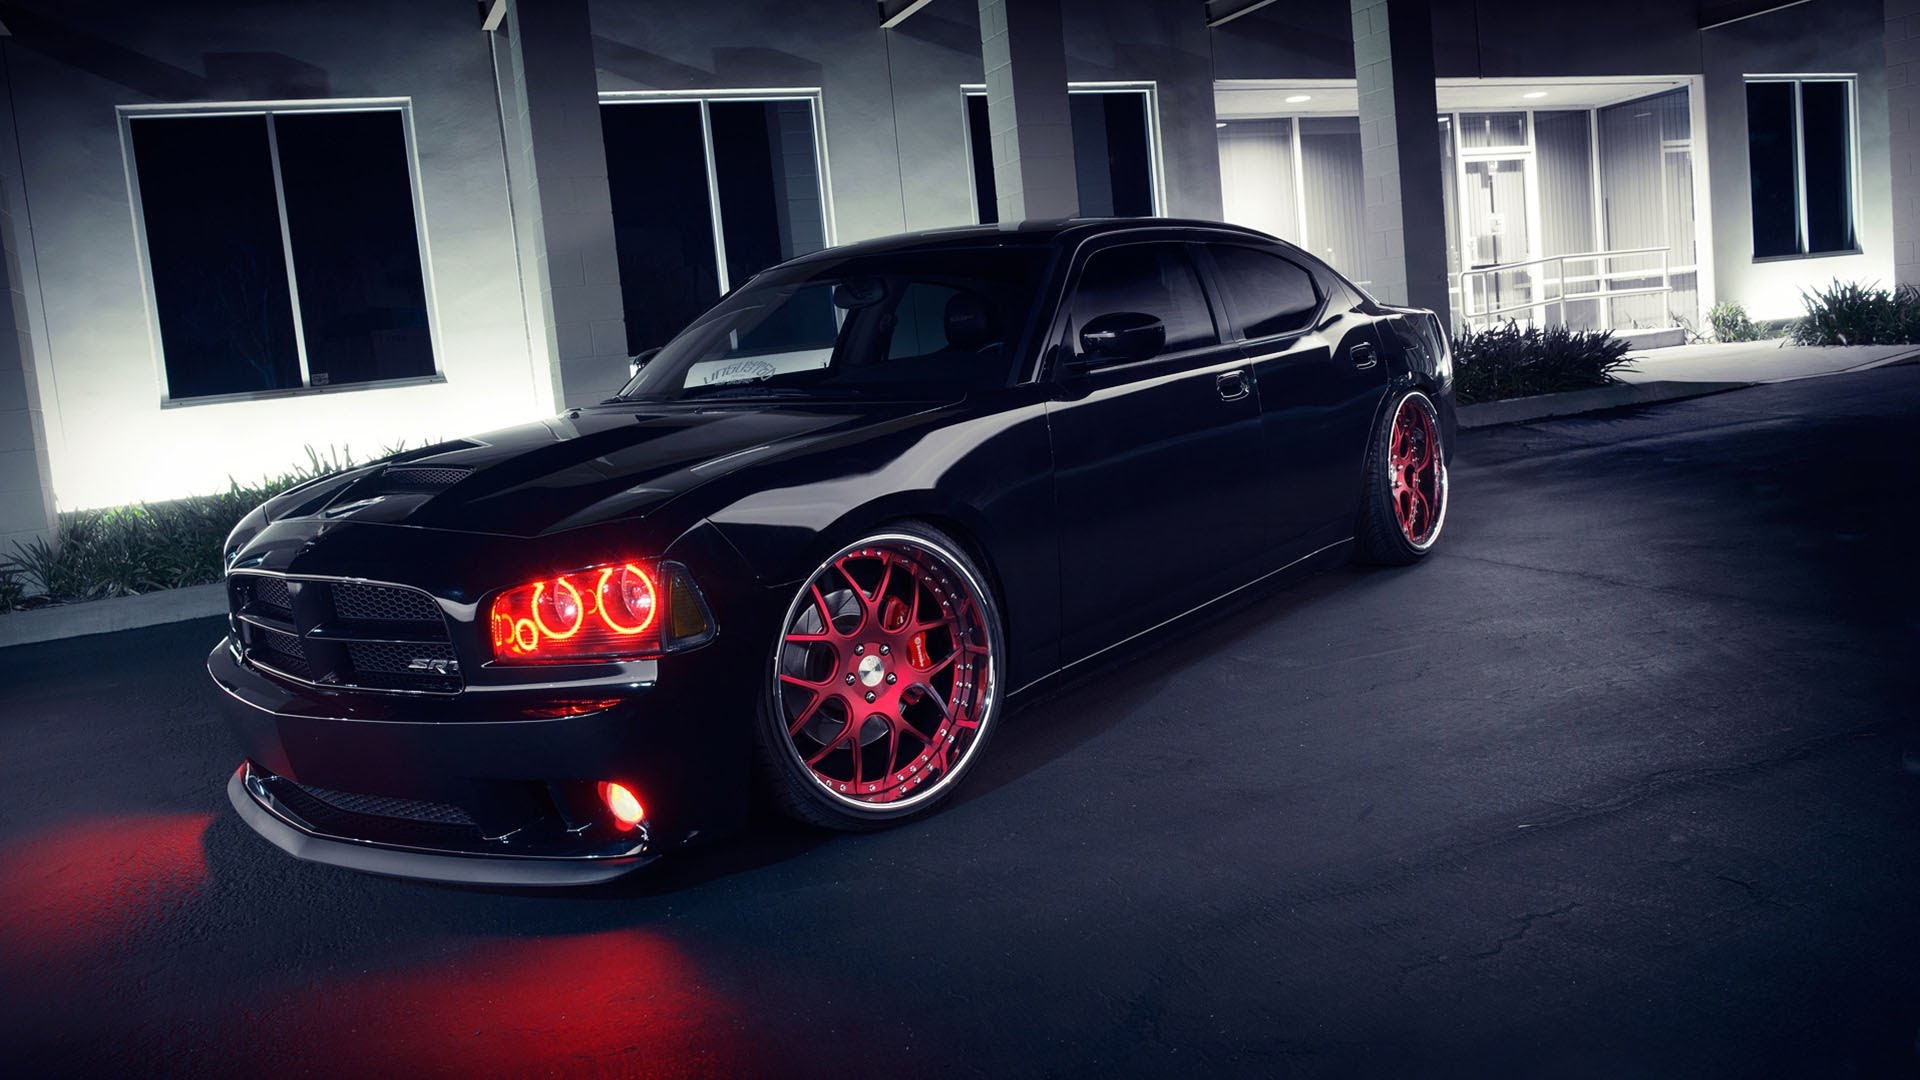 1920x1080 > Dodge Charger Srt8 Wallpapers